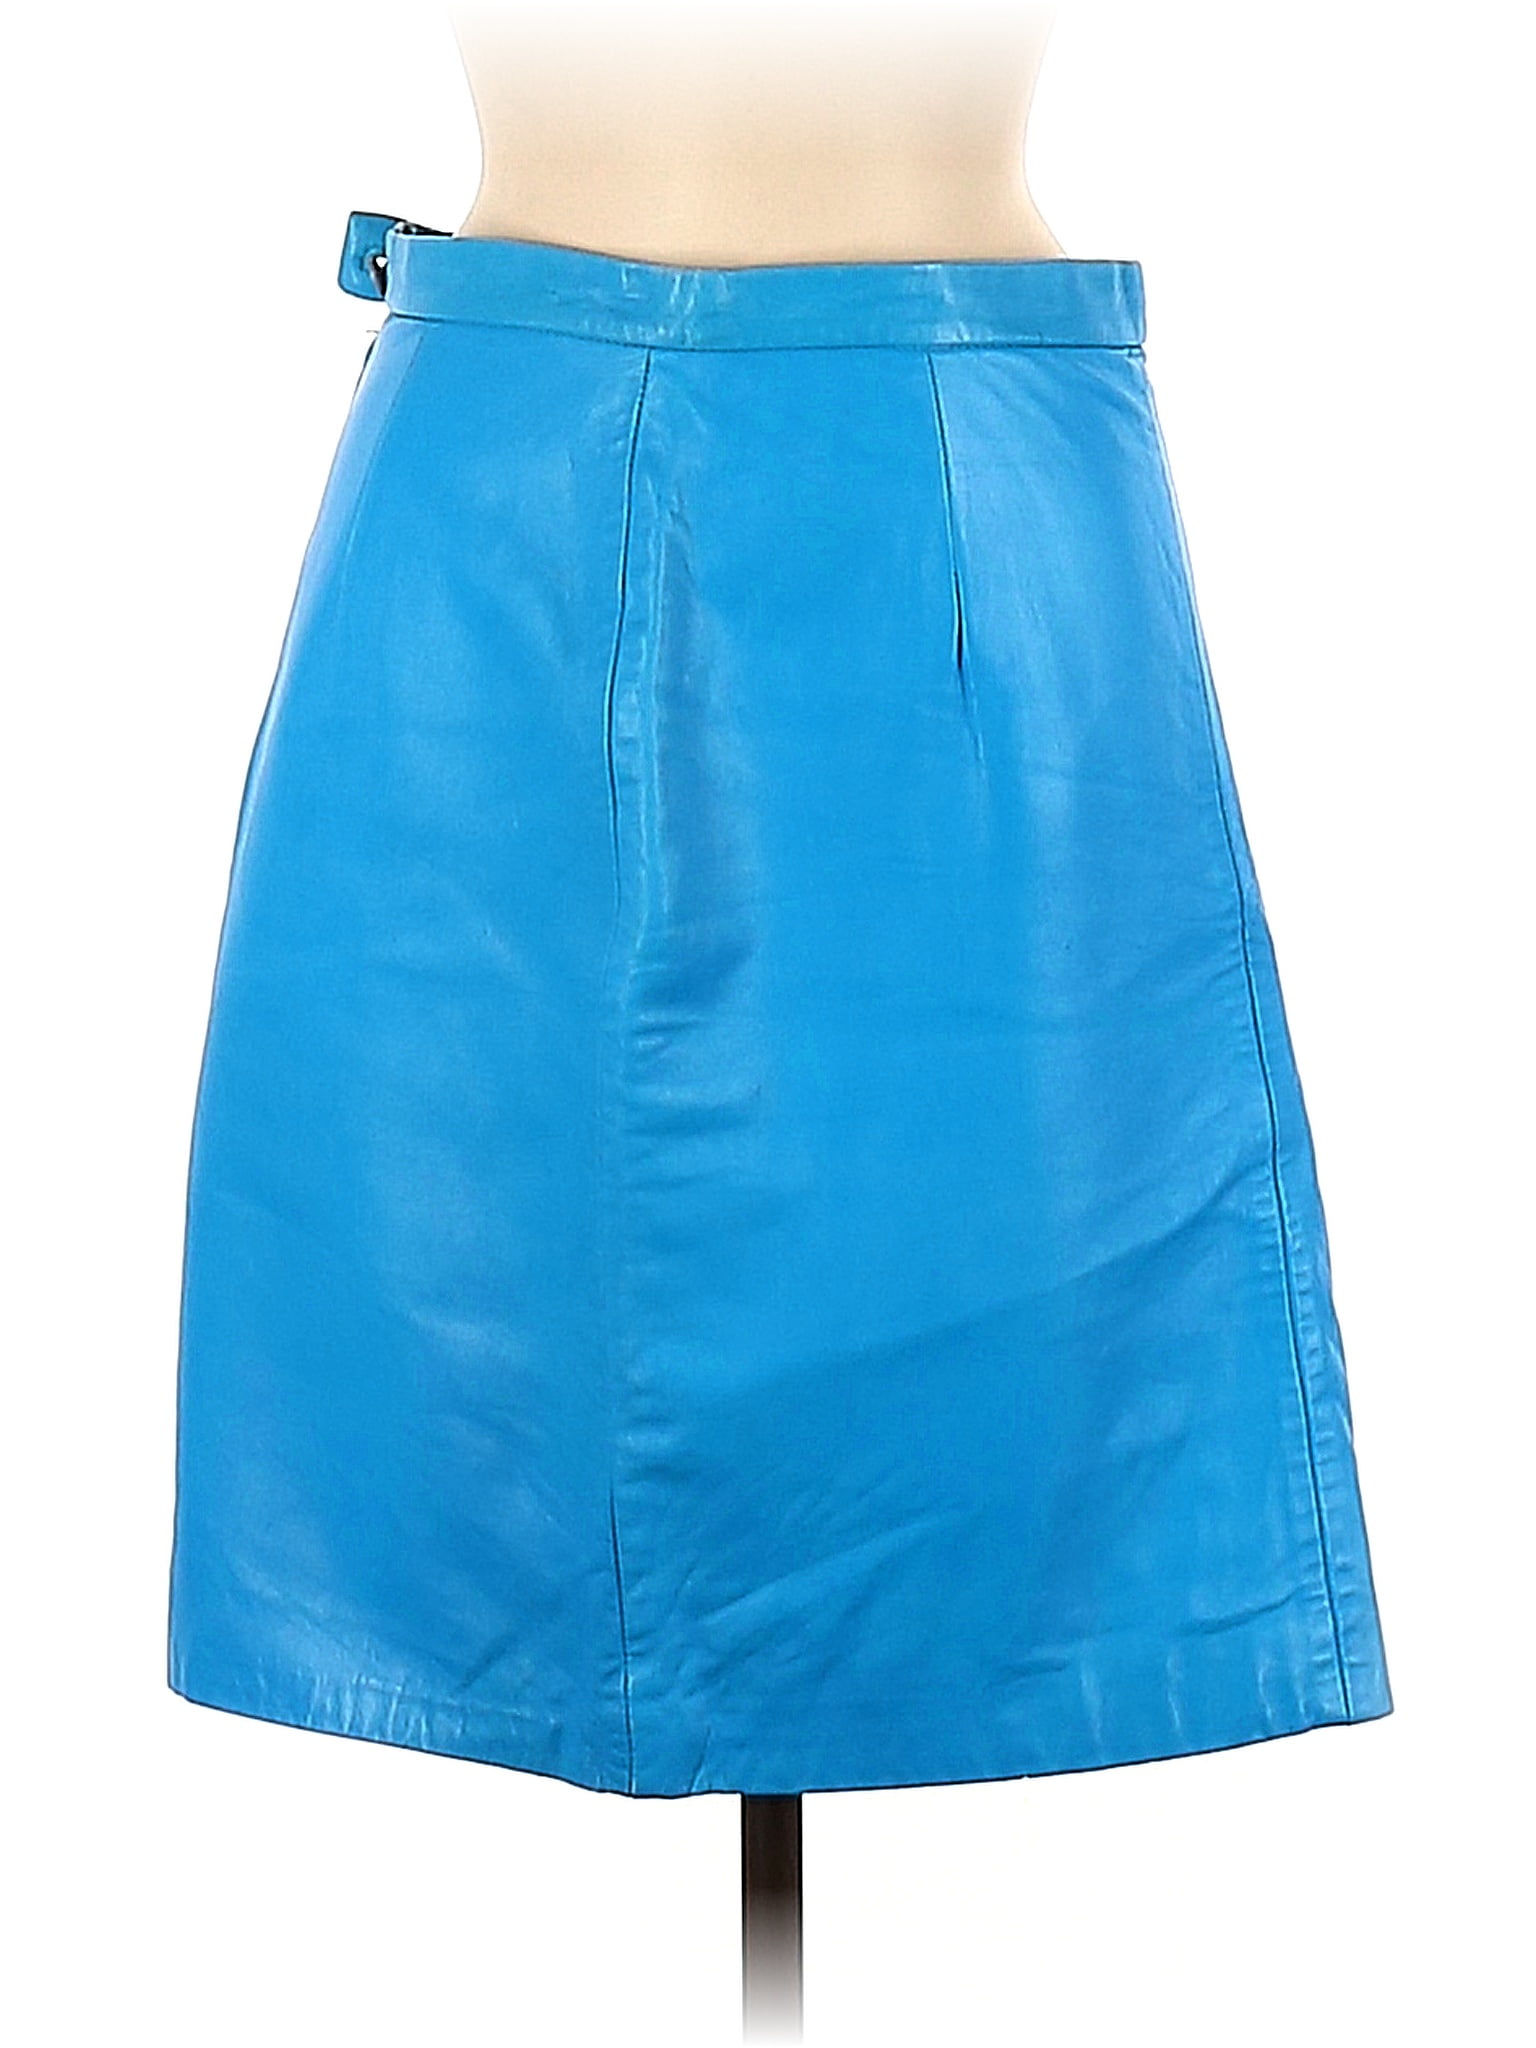 Michael Hoban for North Beach 100% Leather Blue Leather Skirt Size 11 ...